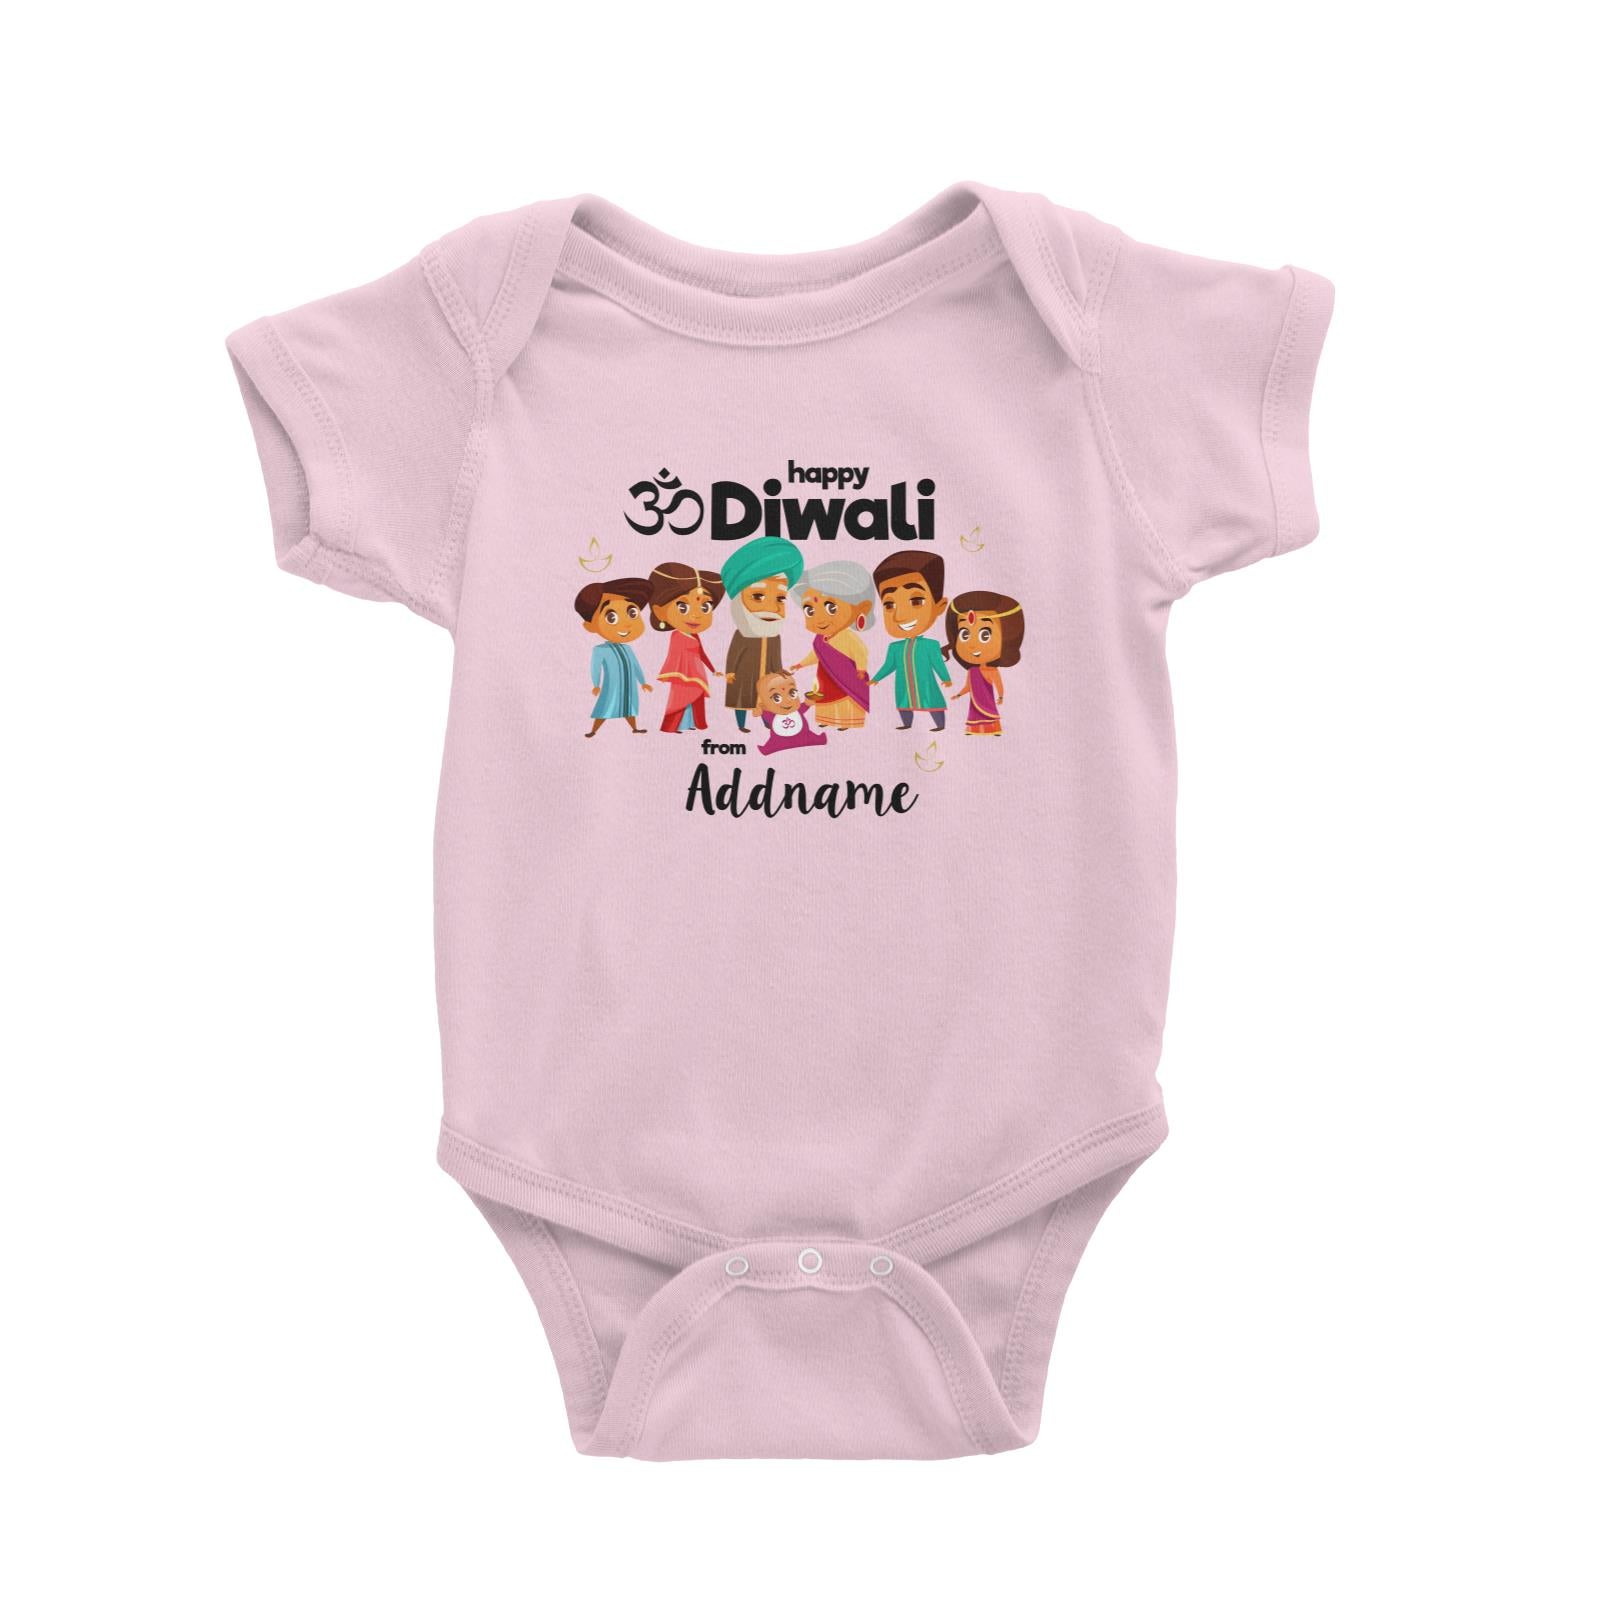 Cute Family Extended OM Happy Diwali From Addname Baby Romper